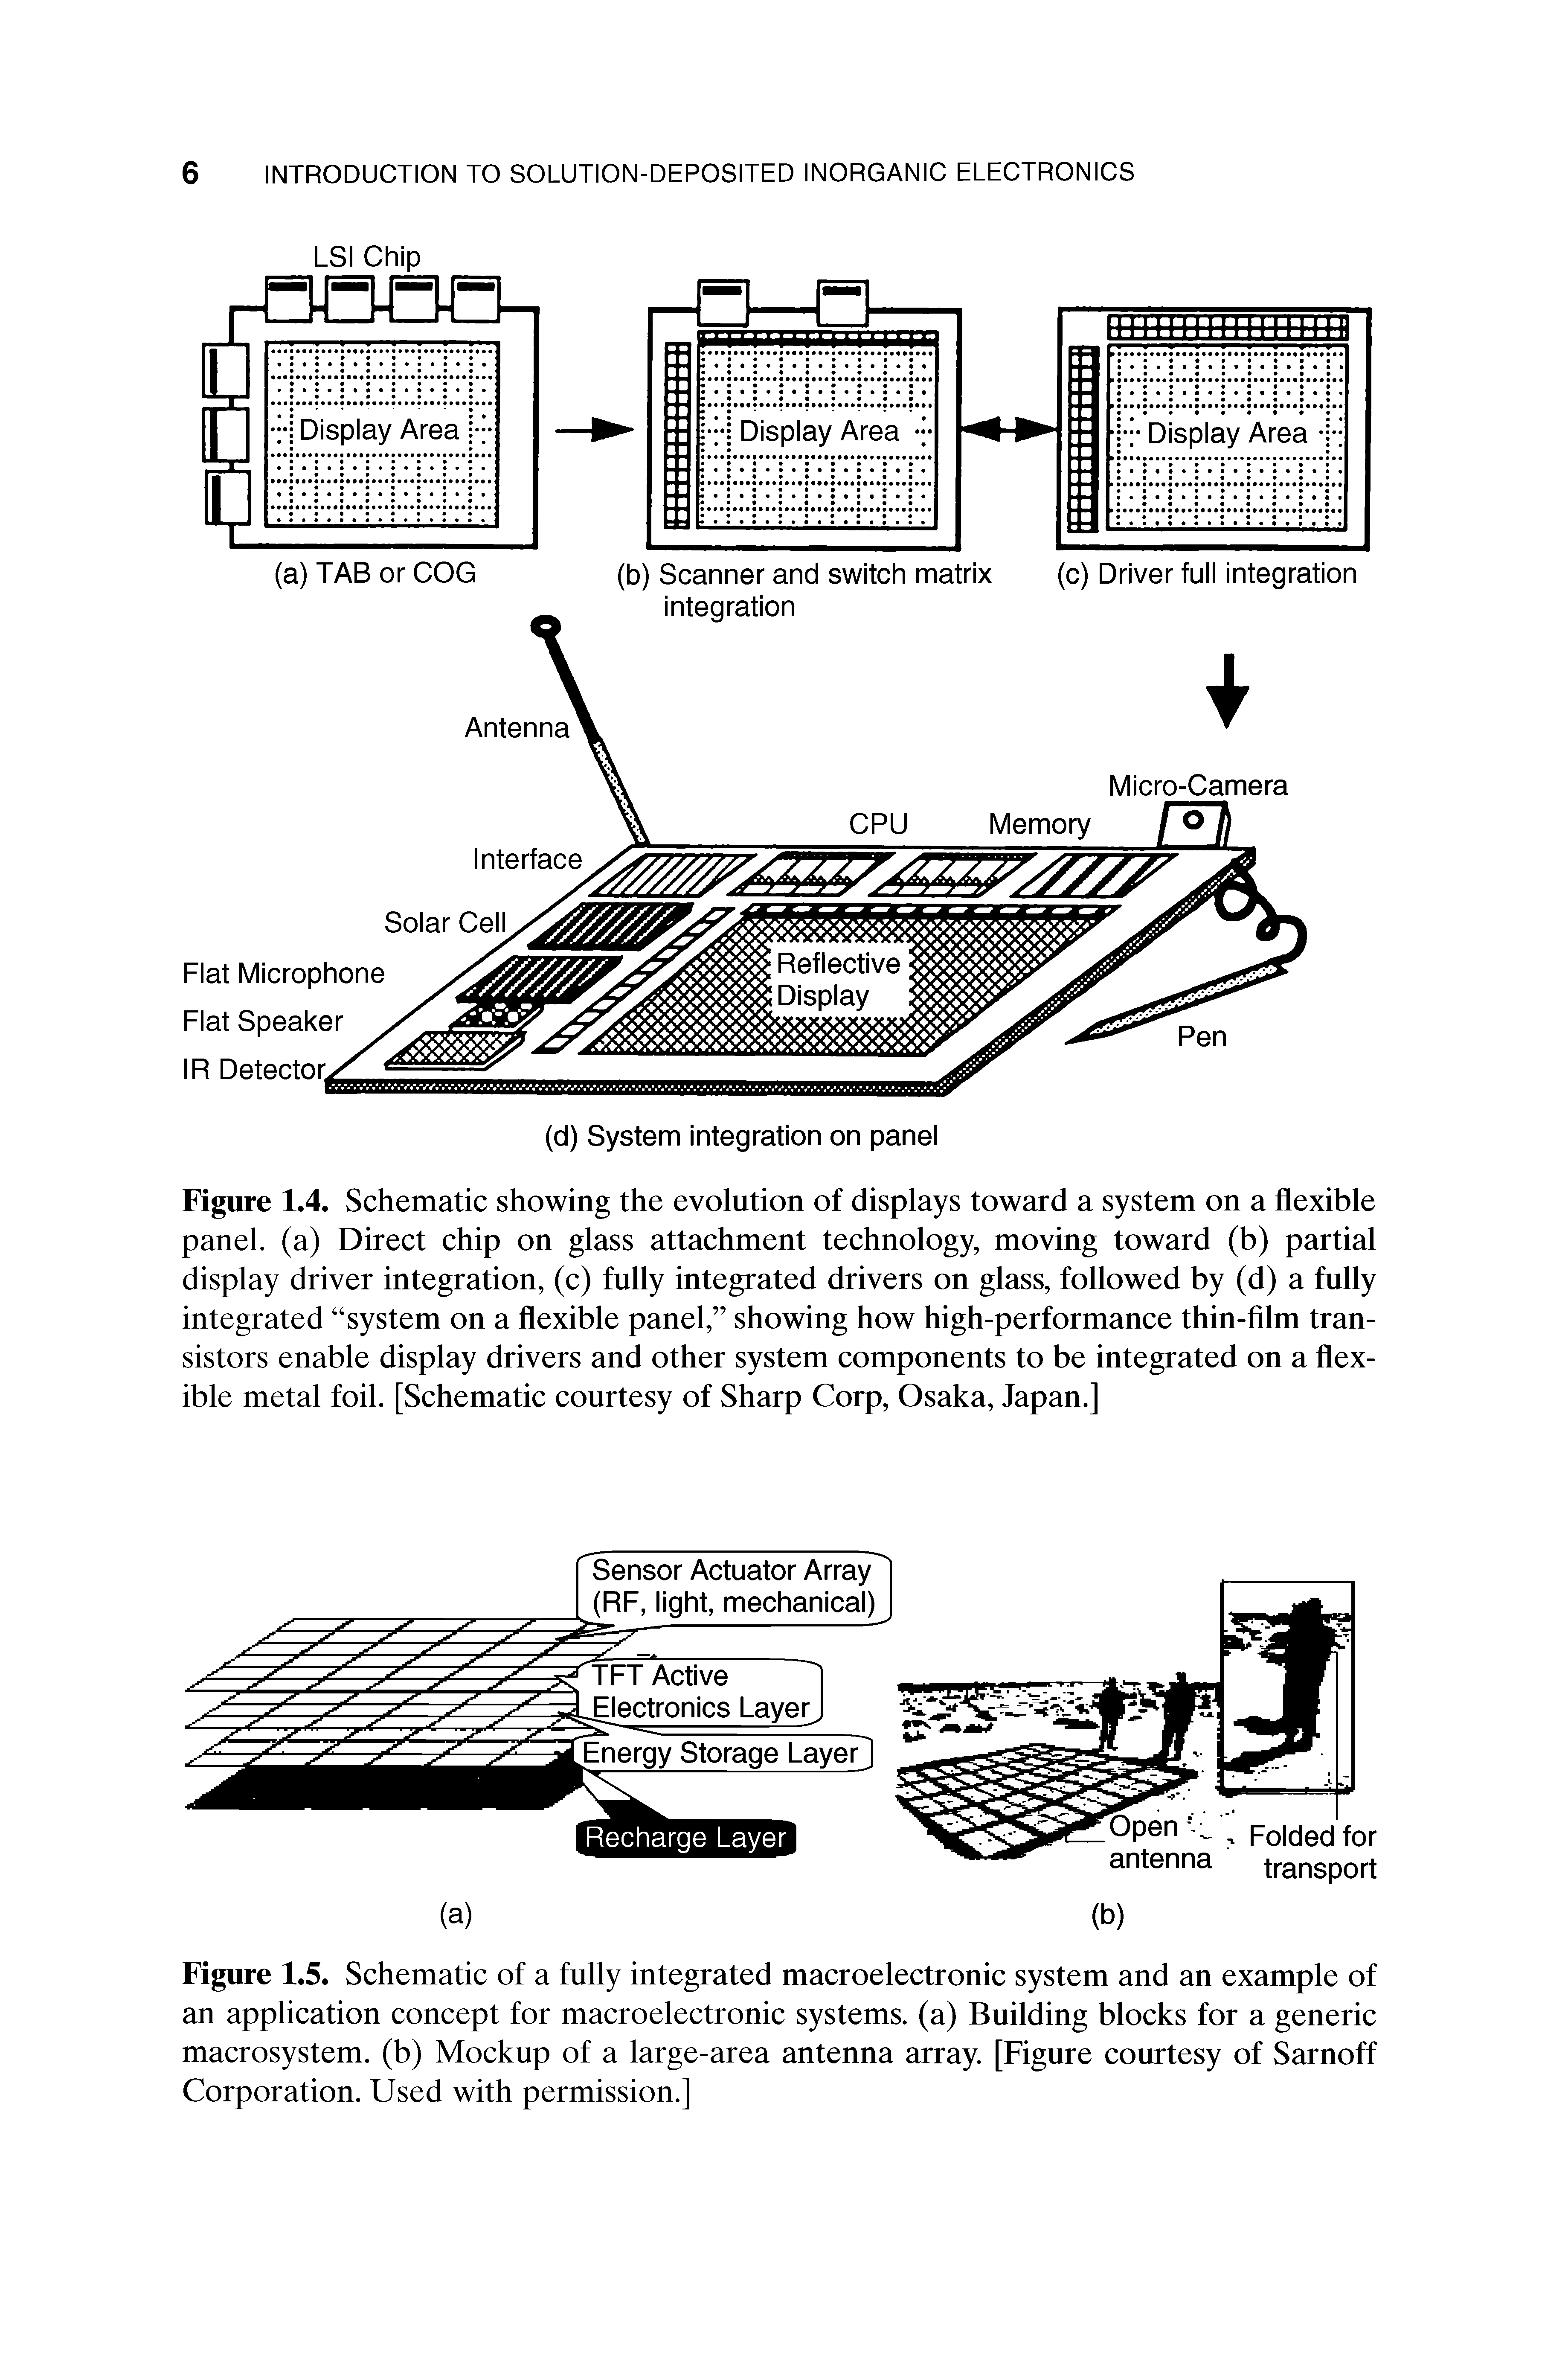 Figure 1.5. Schematic of a fully integrated macroelectronic system and an example of an application concept for macroelectronic systems, (a) Building blocks for a generic macrosystem, (b) Mockup of a large-area antenna array. [Figure courtesy of Sarnoff Corporation. Used with permission.]...